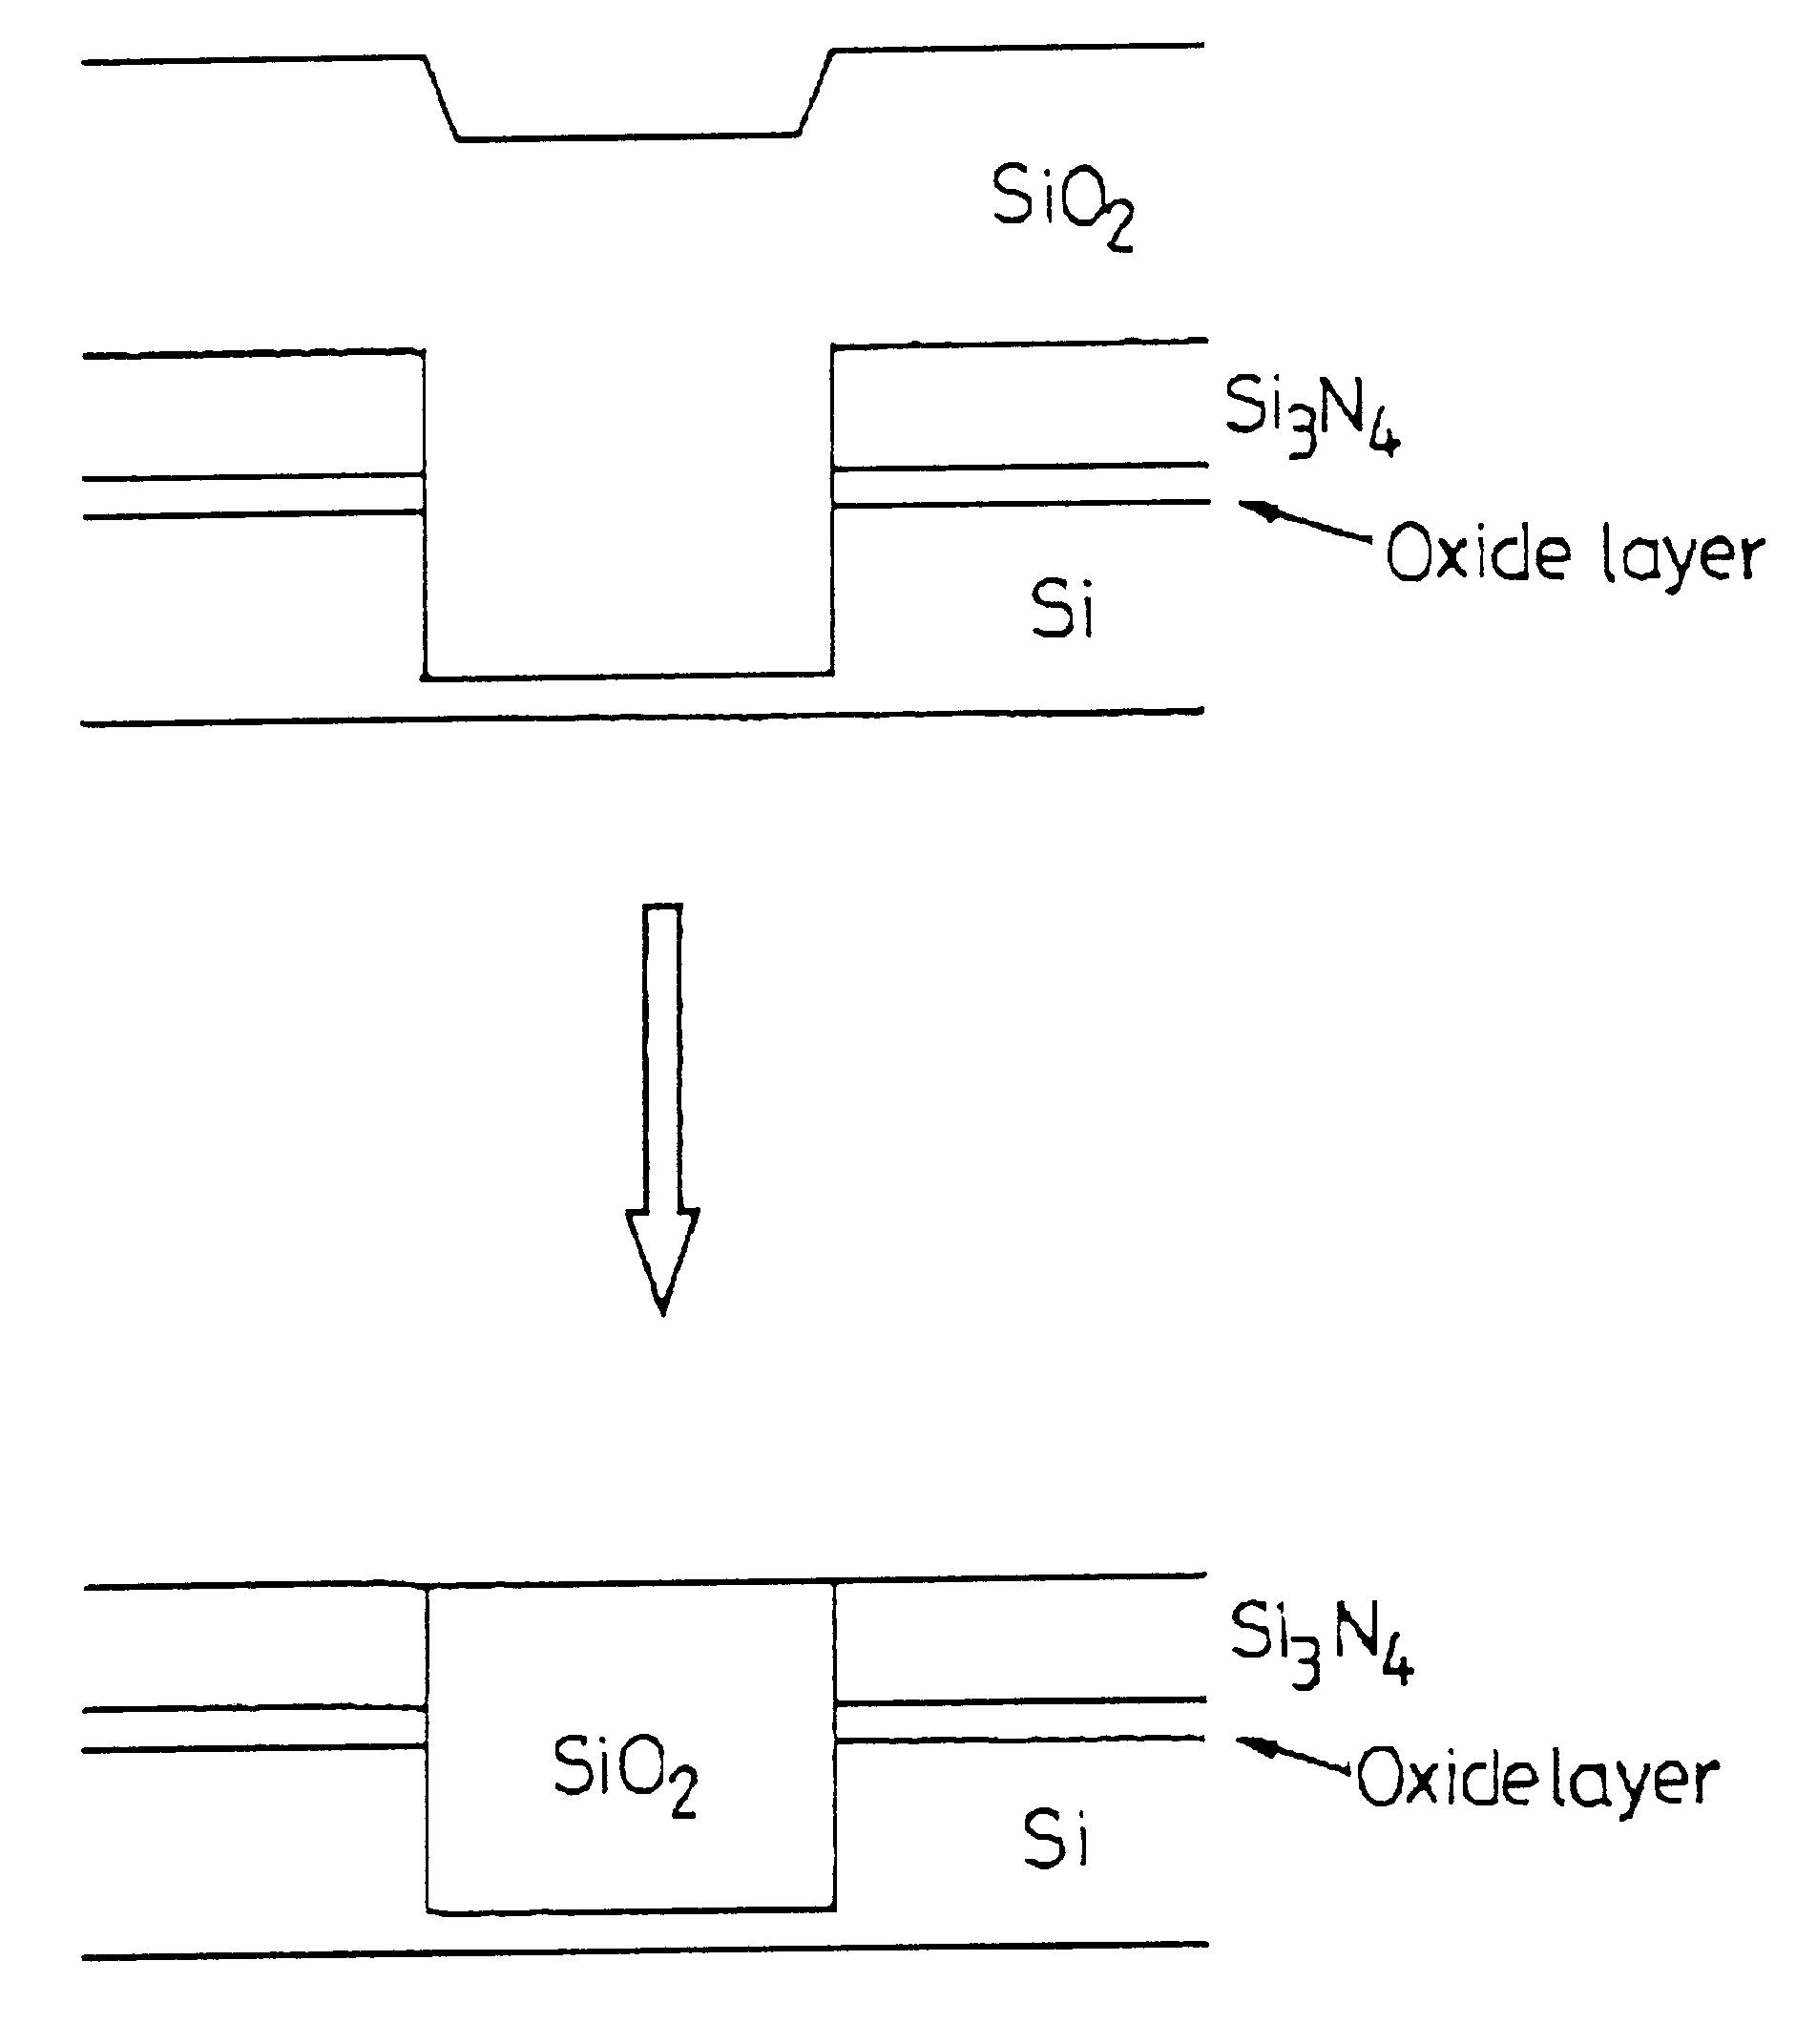 Chemical-mechanical abrasive composition and method